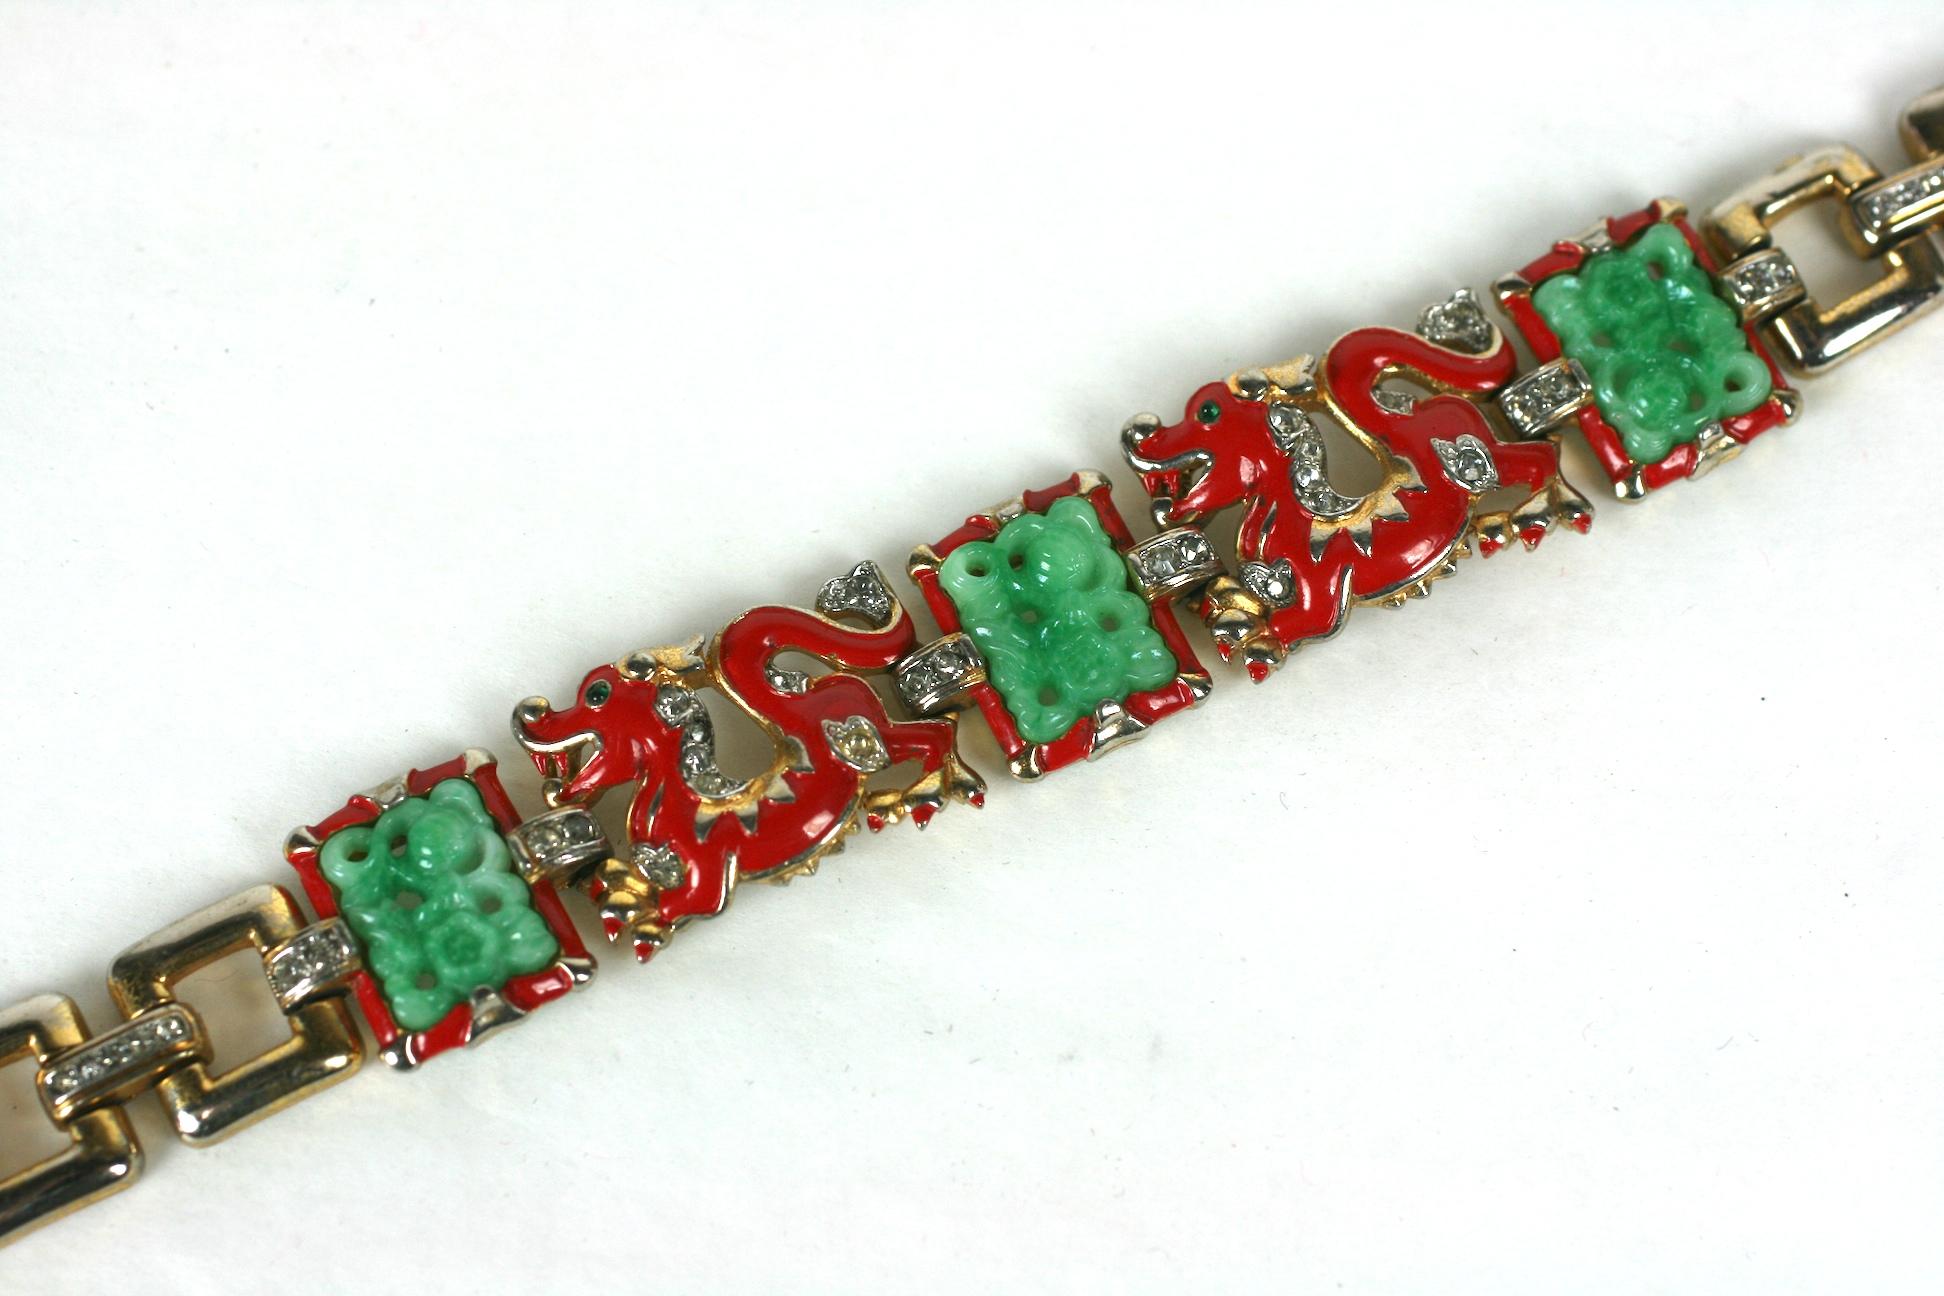 Super Rare and collectible Trifari Alfred Phillipe Ming Dragon Bracelet from the 1930's. 3 faux jade panels are surrounded by red enameled dragons with faux emerald cab eyes. Gilt and pave links form the back. Signed 